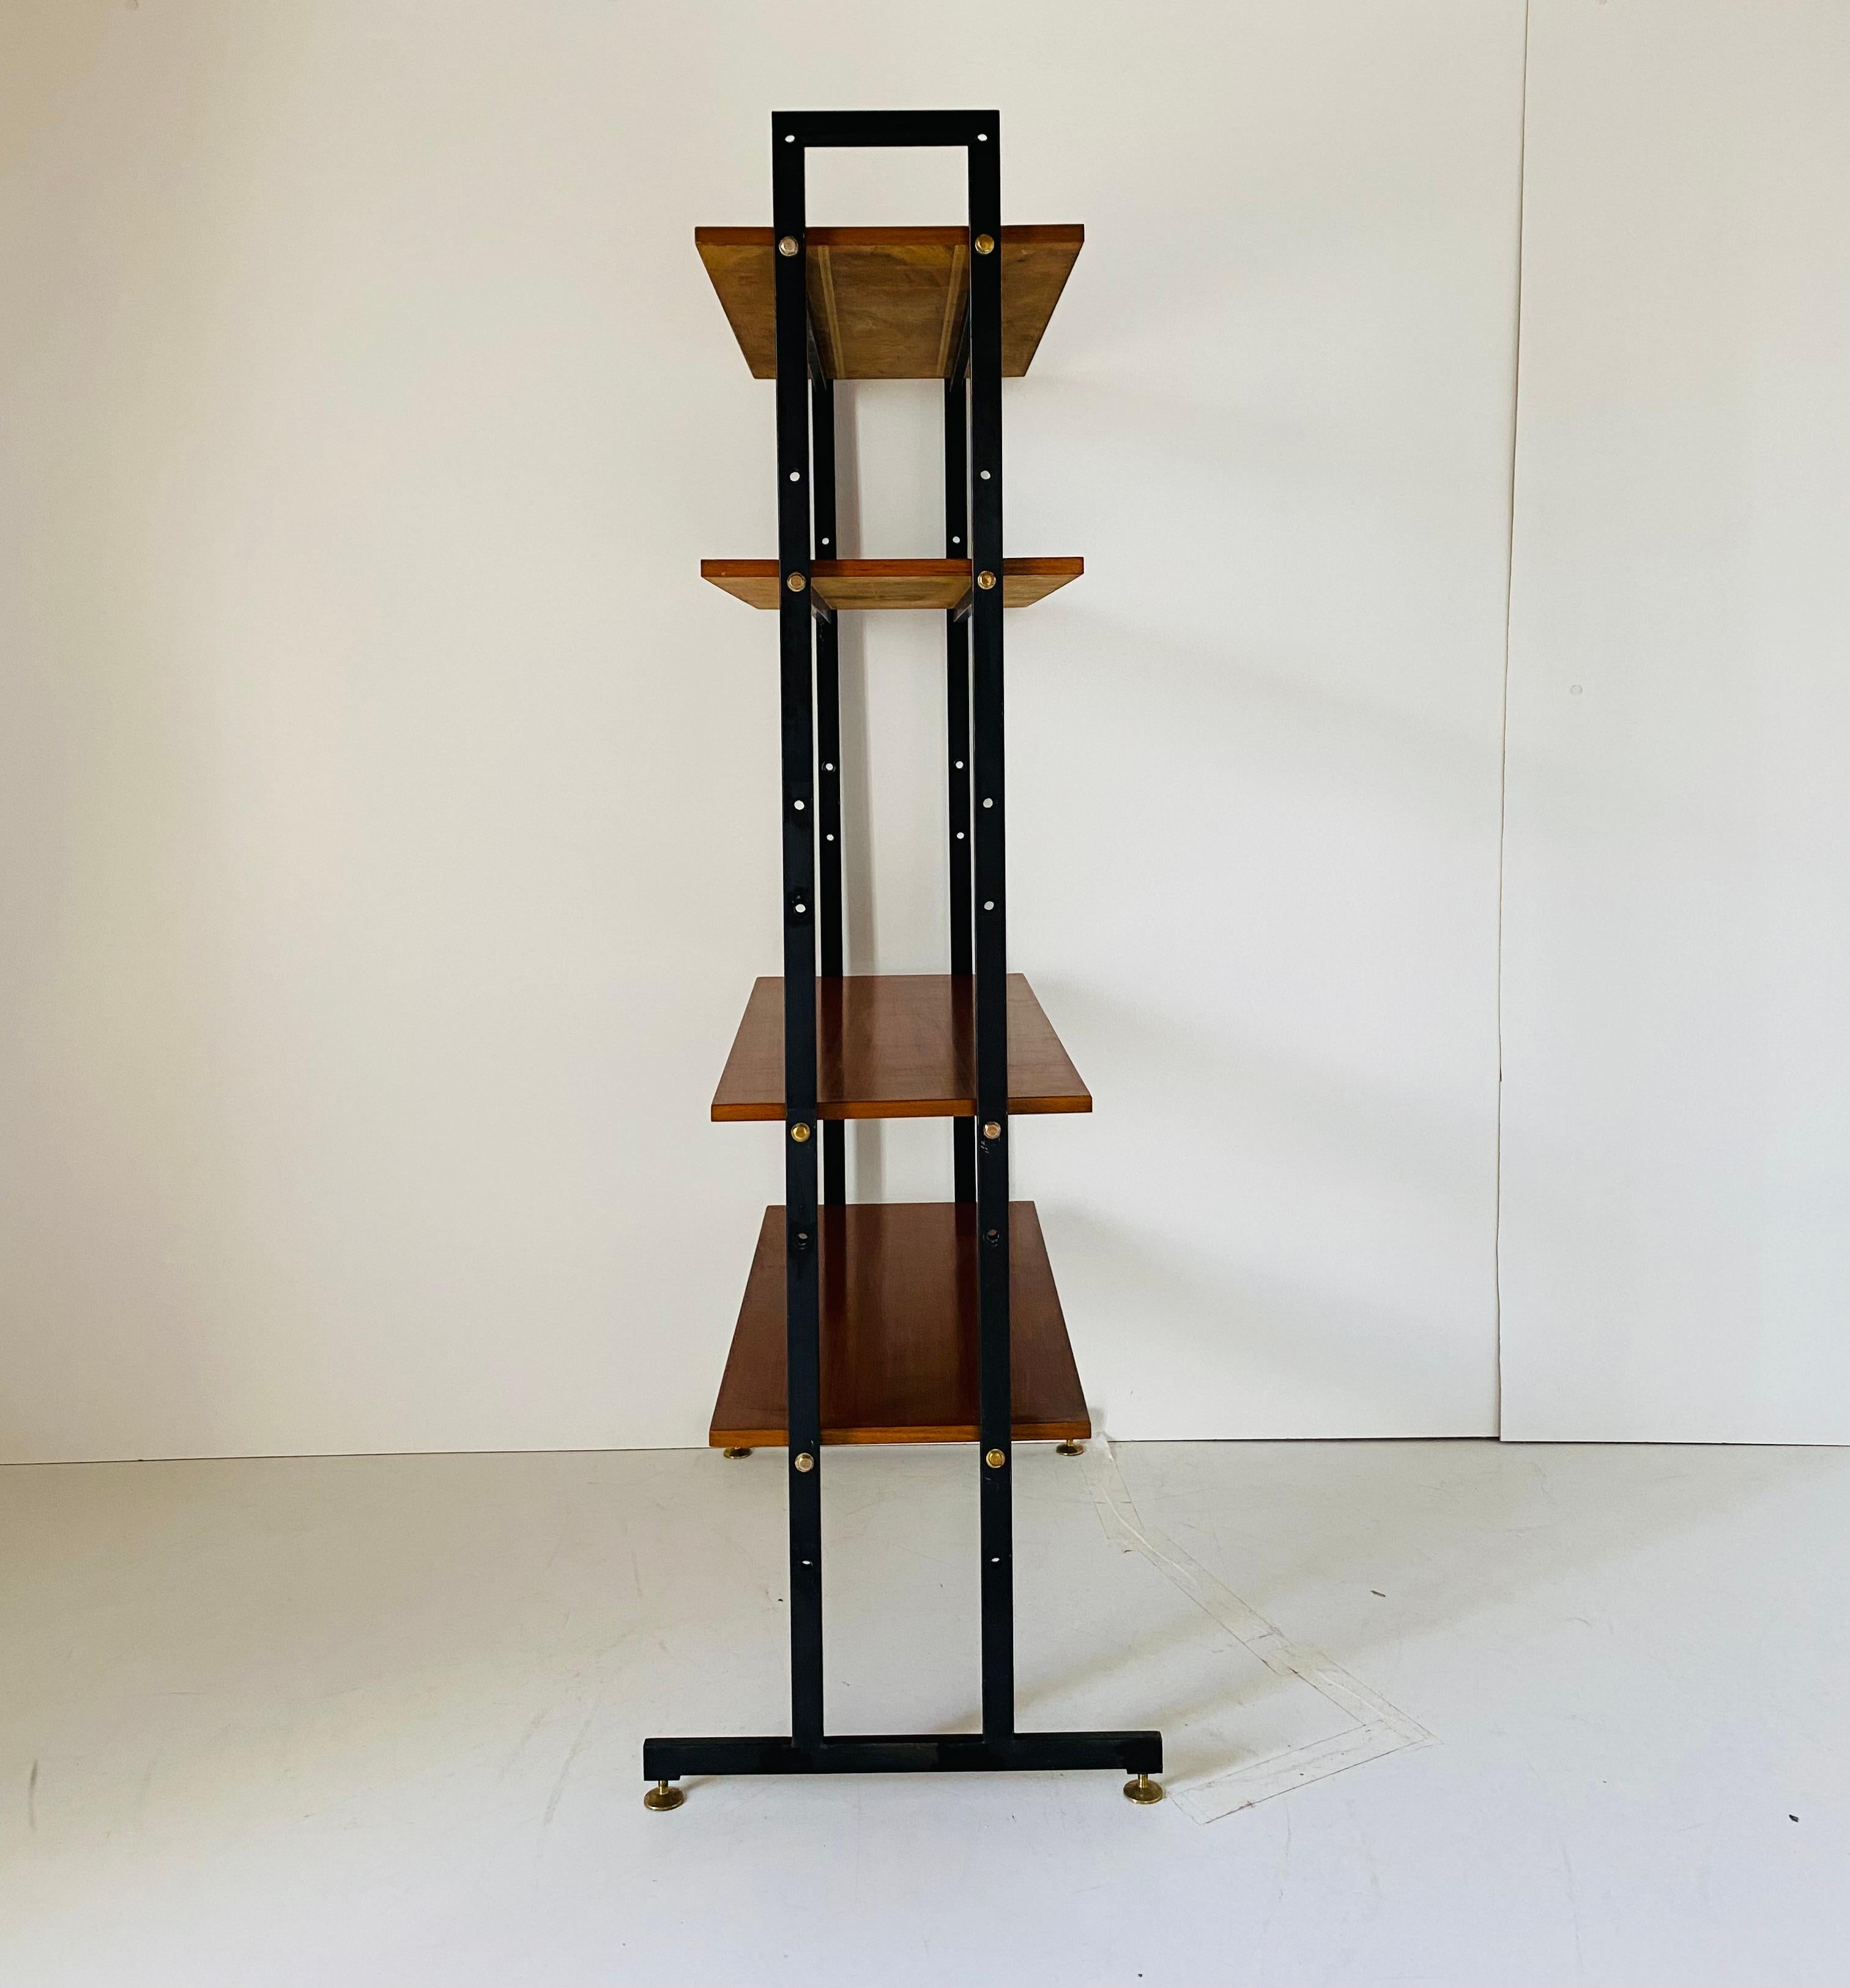 Vintage Scandinavian Shelf, teak, iron, Scandinavia 1960s.
Elegant vintage book shelf in scandinavian style. Teak wood shelves with a black iron frame and brass round feet. Wood has been polished and major damages have been repaired. In very good